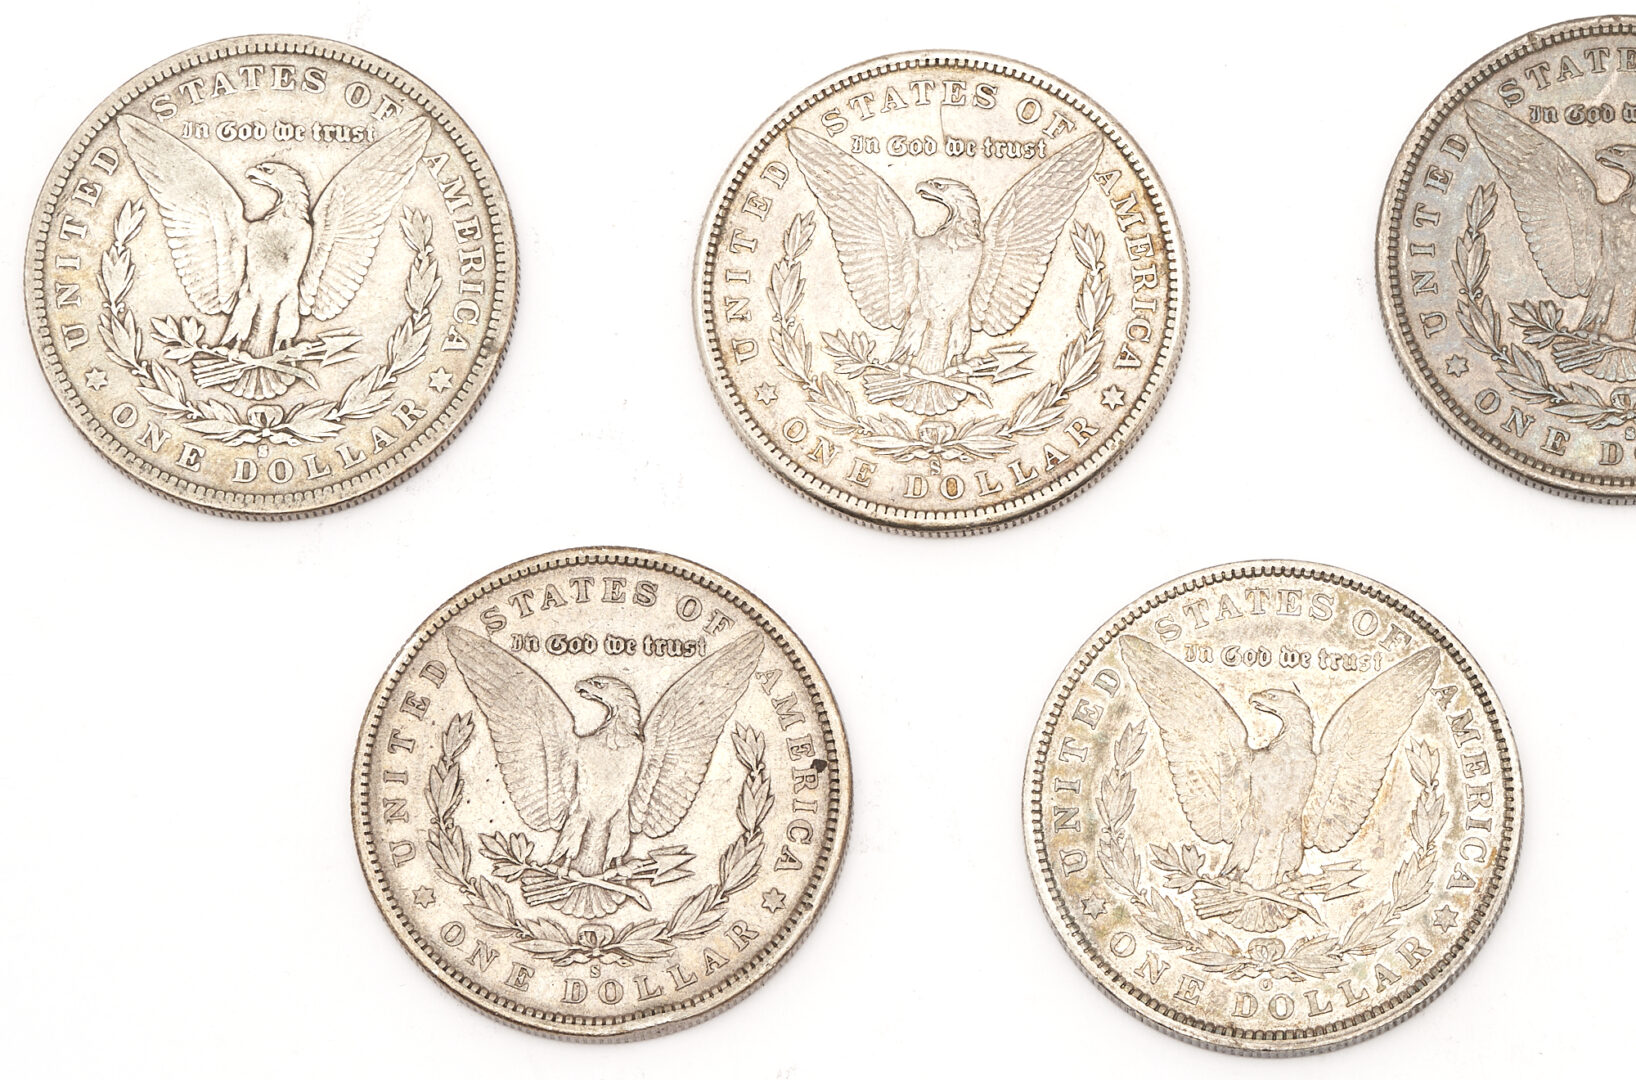 Lot 609: Group of 8 US Morgans, 1 Peace Silver Dollar, & 1925 Norse American Medal